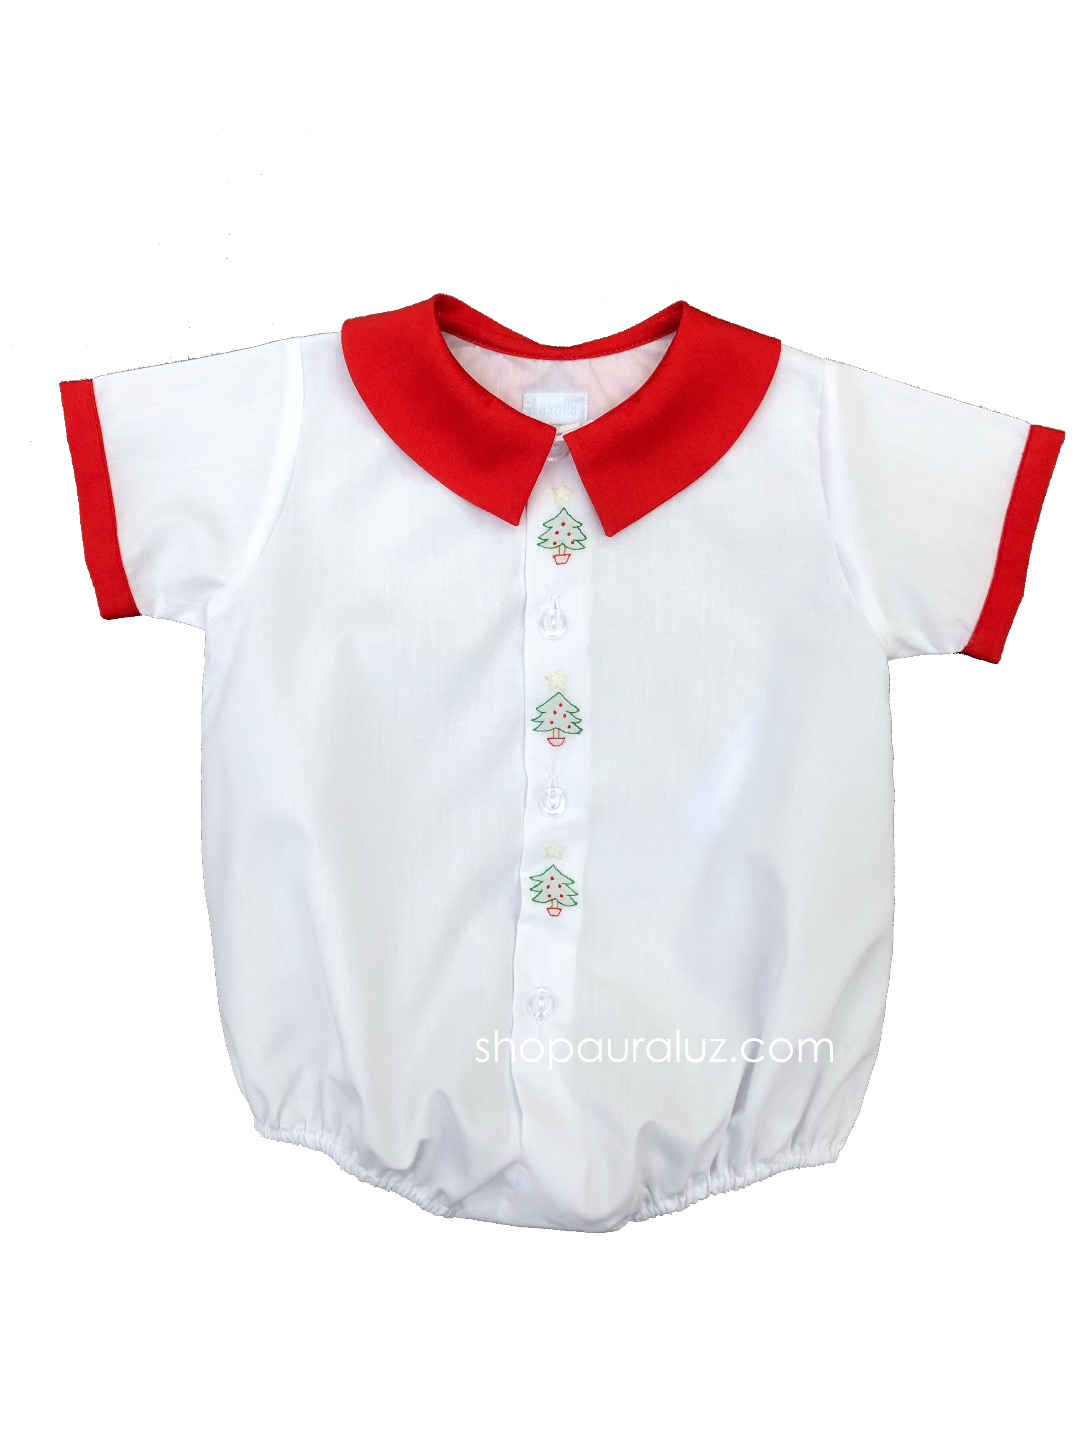 Auraluz Christmas Boy Bubble/Button-Front..White with red boy collar and embroidered trees